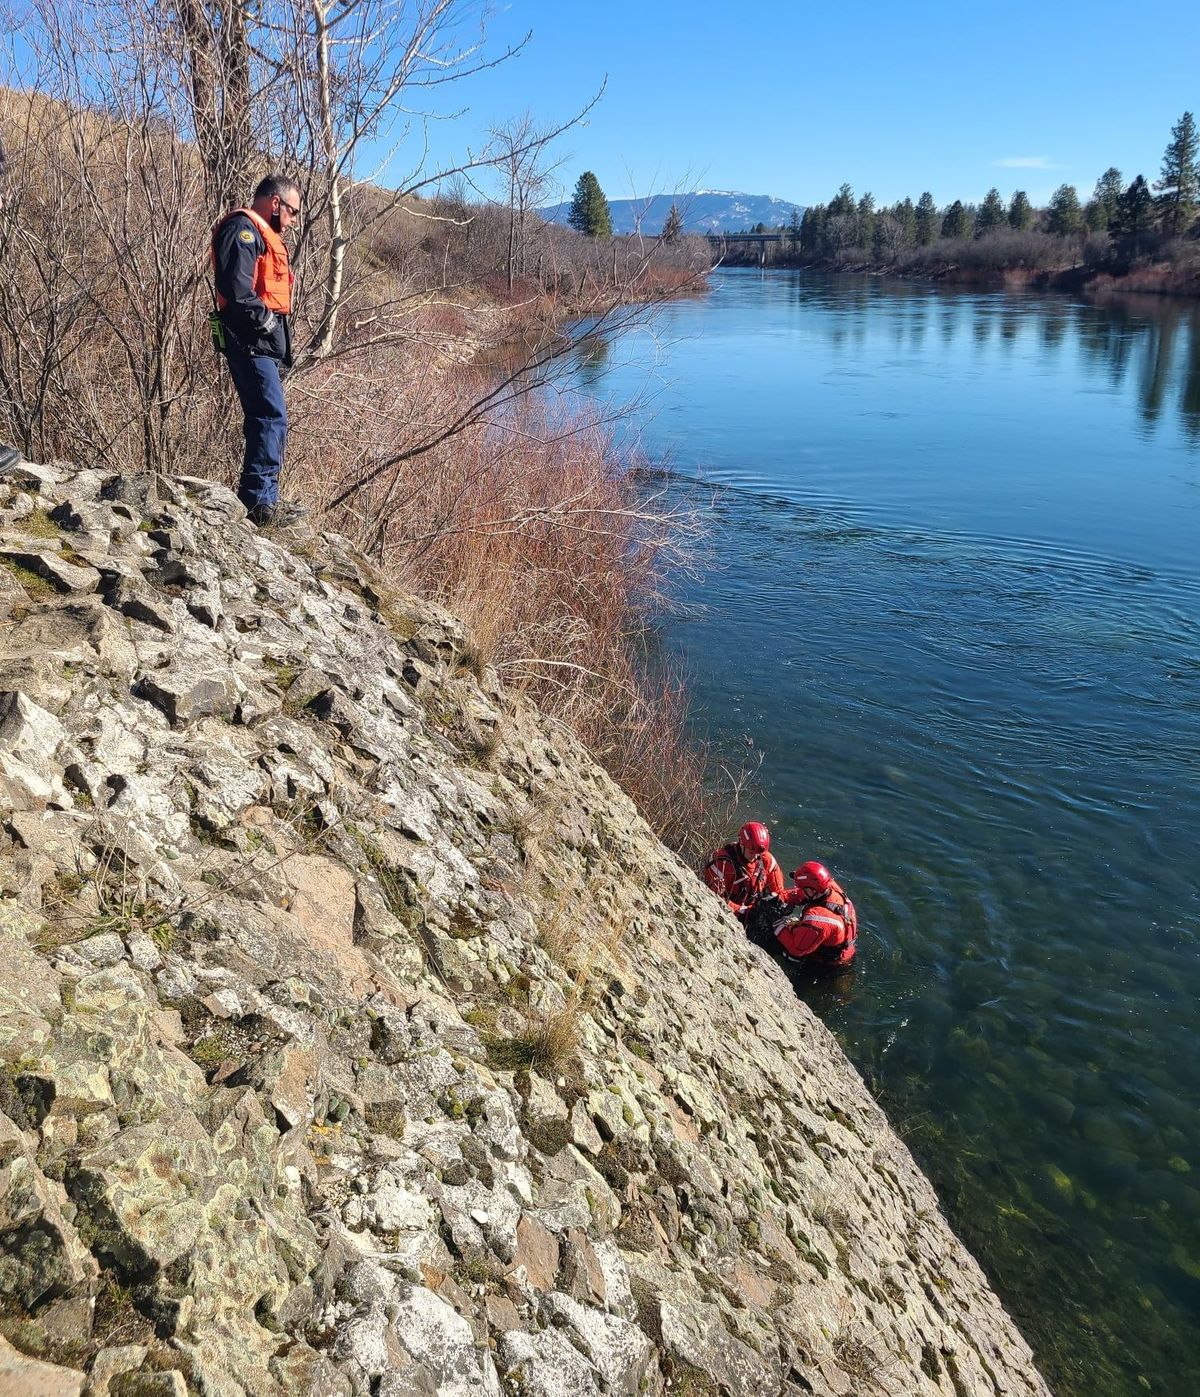 Spokane Valley Fire Department crew members wear swift water rescue gear to reach a dog that had fallen into the Spokane River near Plante’s Ferry Park on March 1. It had climbed on a ledge but couldn’t reach safety.  (SVFD Facebook page)